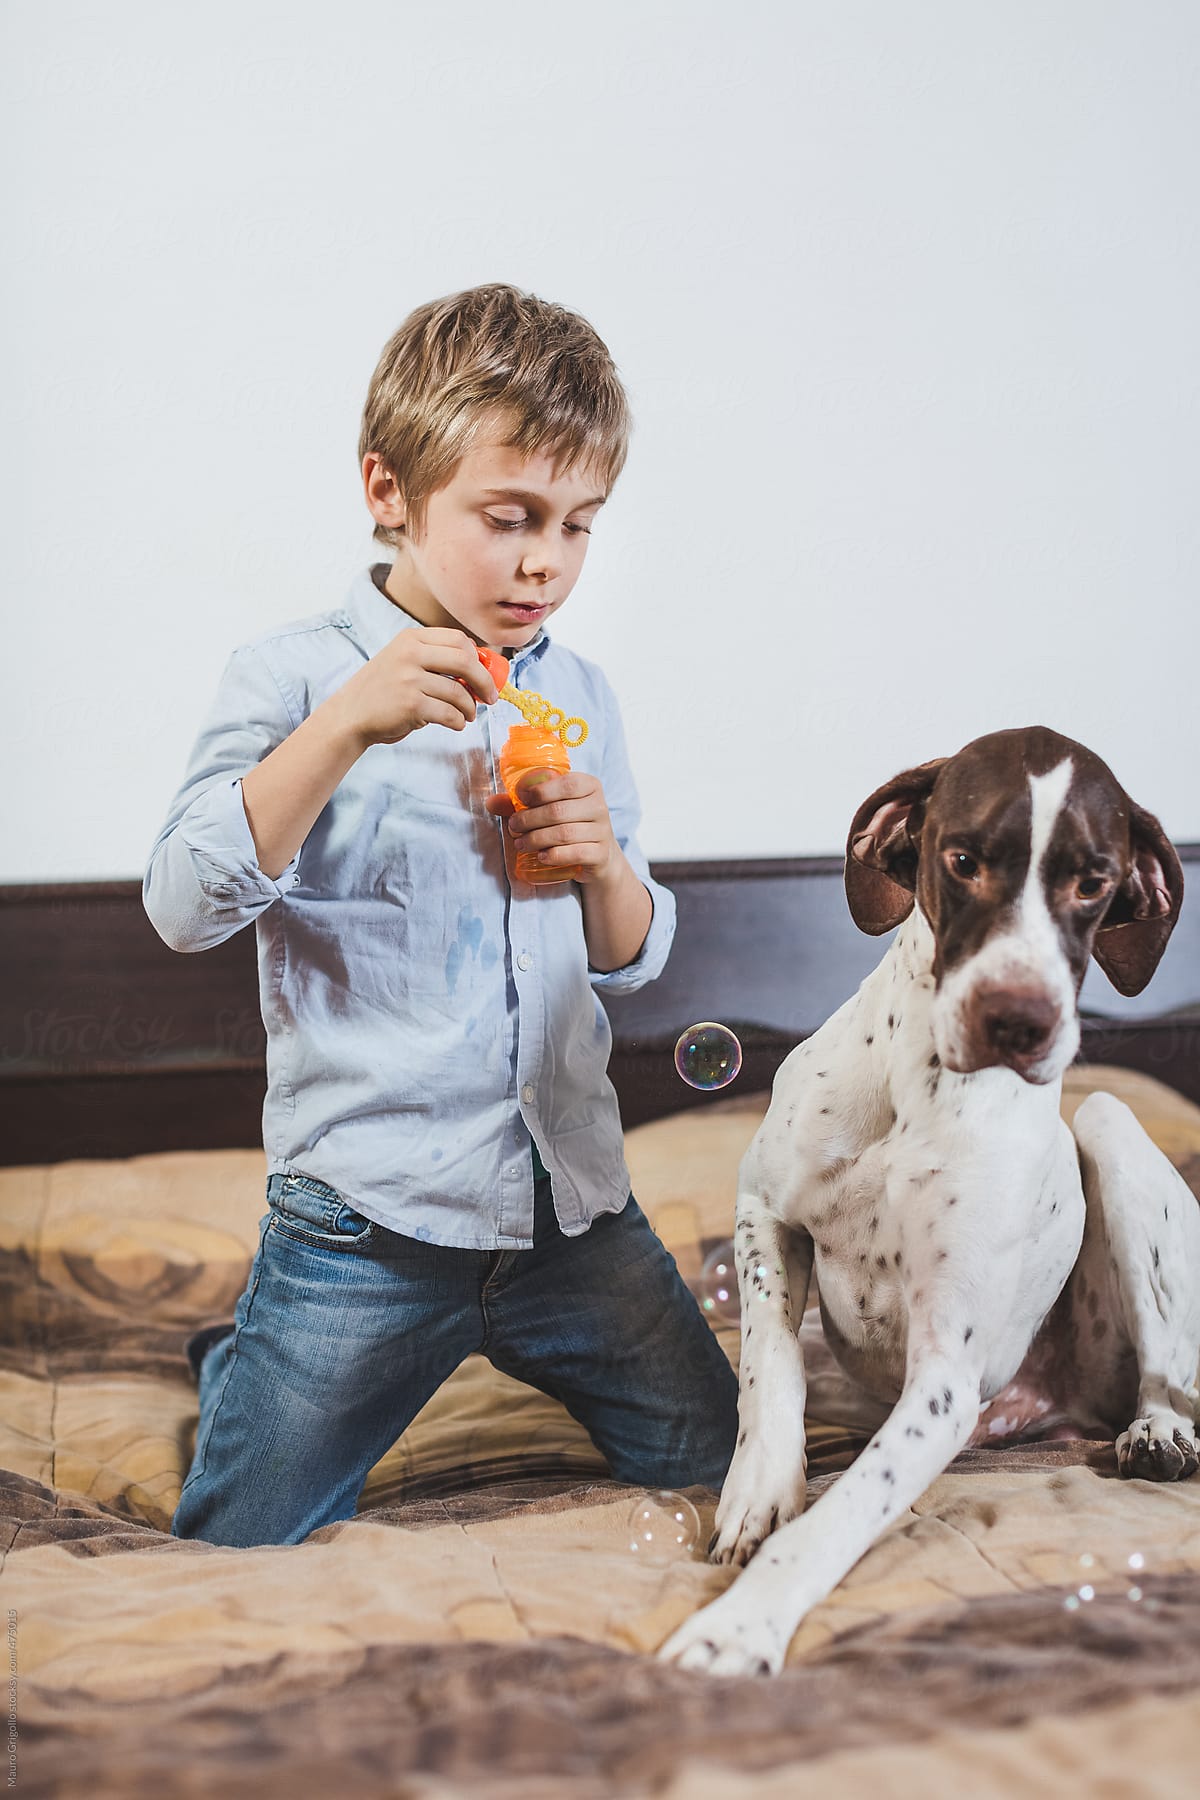 Young boy playing with bubbles with his dog